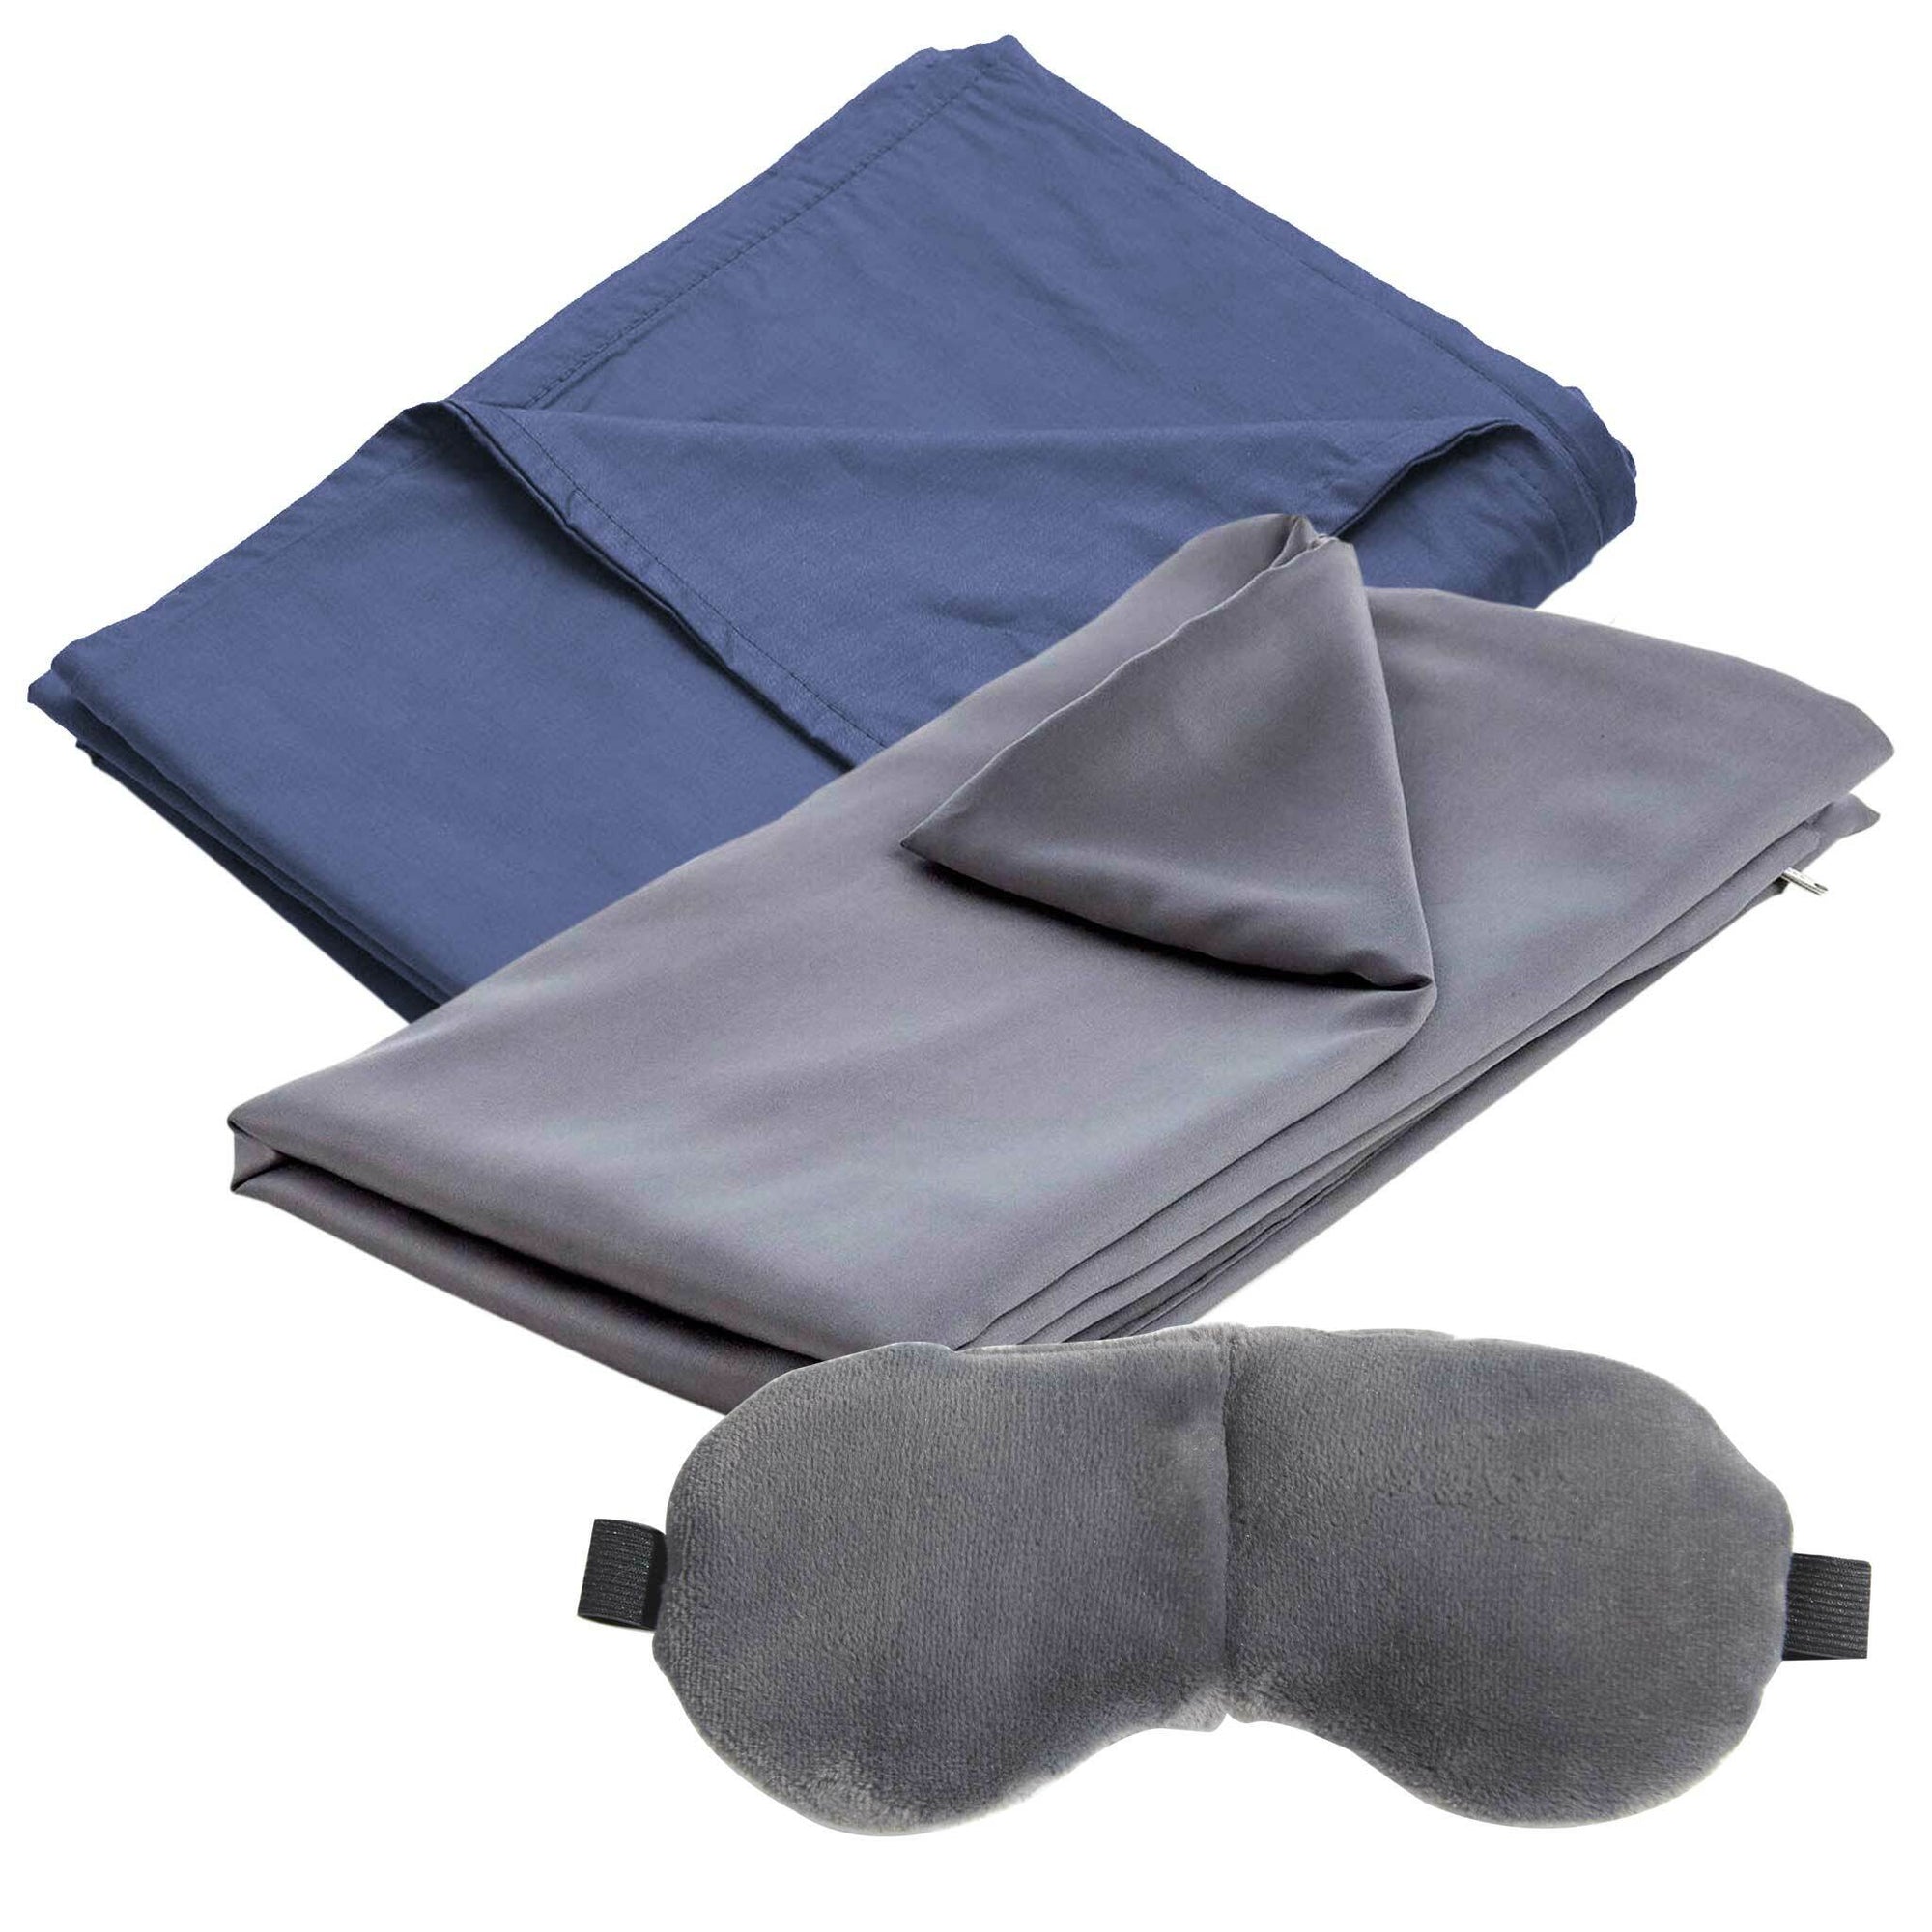 Polar Night Duvet Cover 150x200cm + Weighted Eye Mask Special Bundle